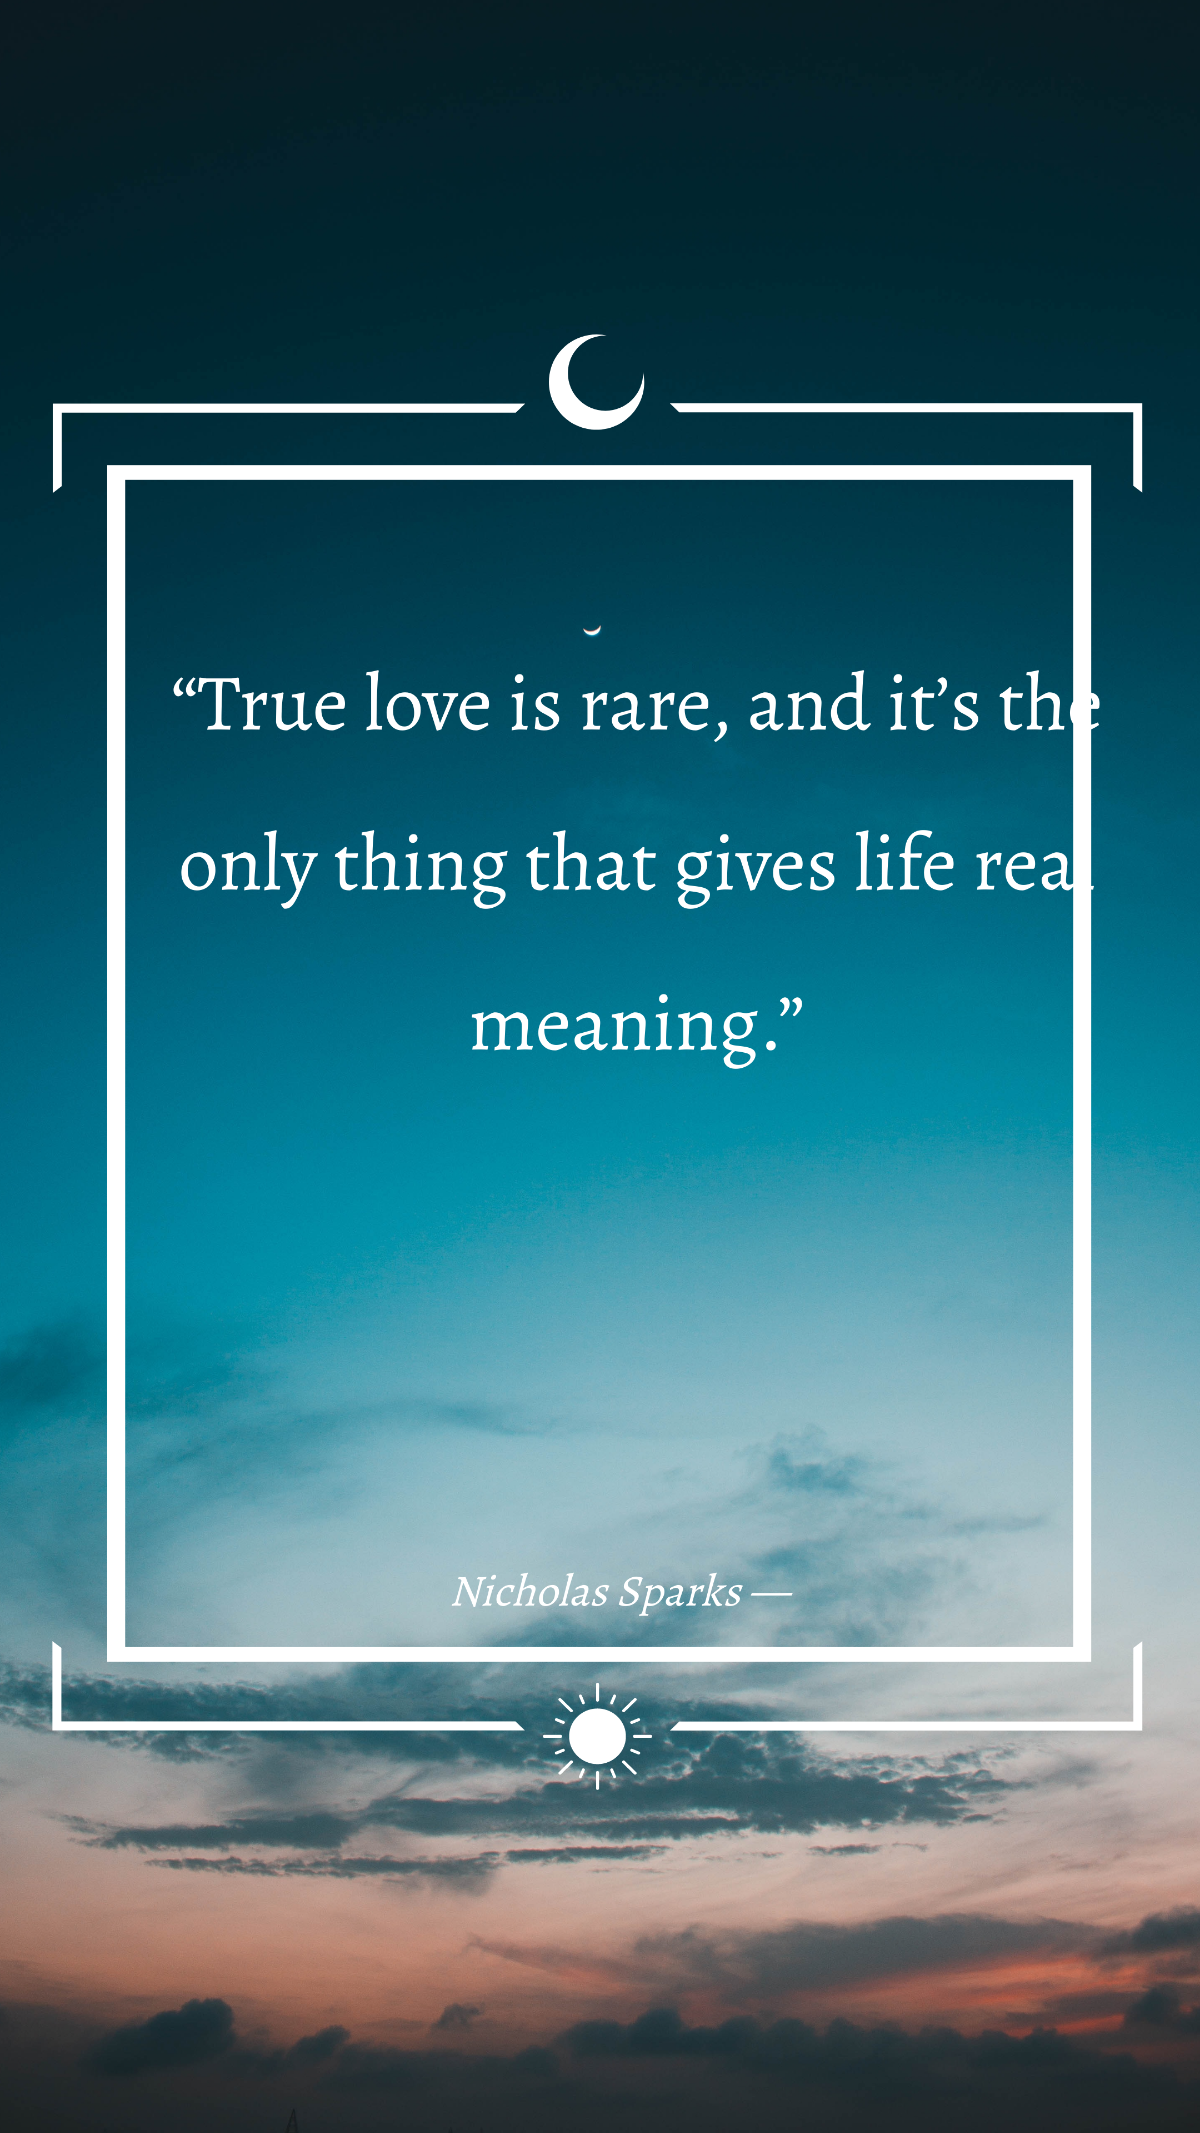 Nicholas Sparks — “True love is rare, and it’s the only thing that gives life real meaning.”